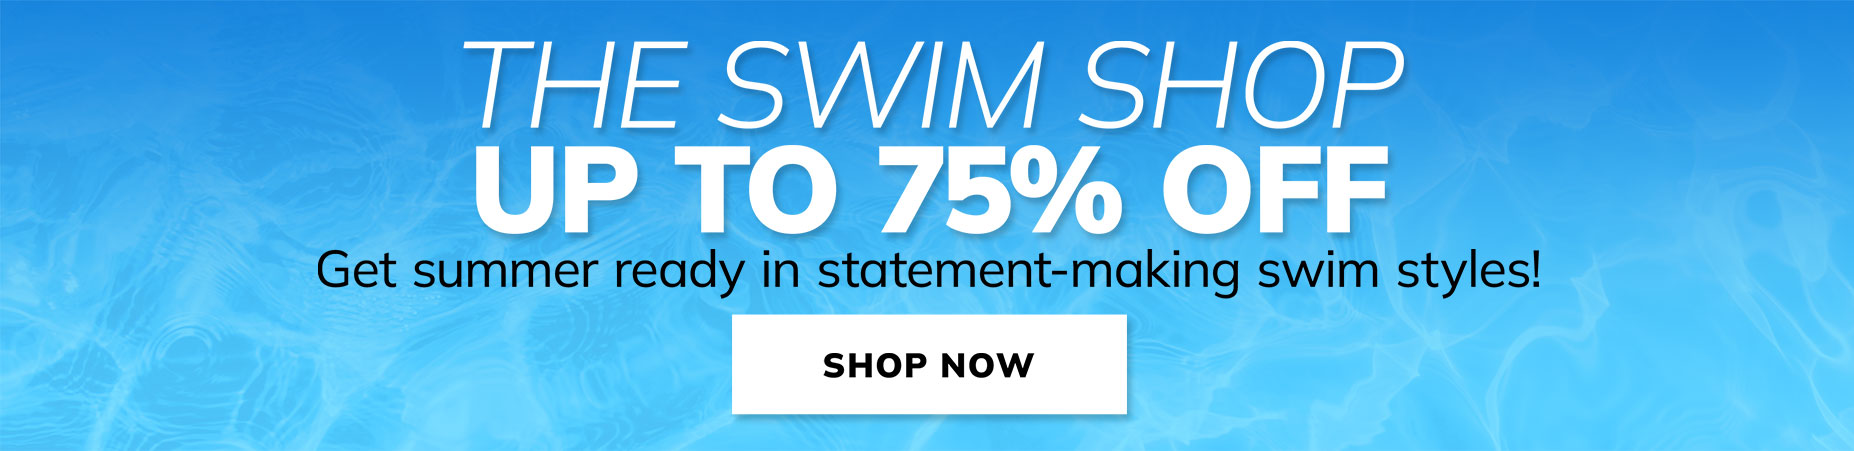 THE SWIM SHOP - UP TO 75% OFF